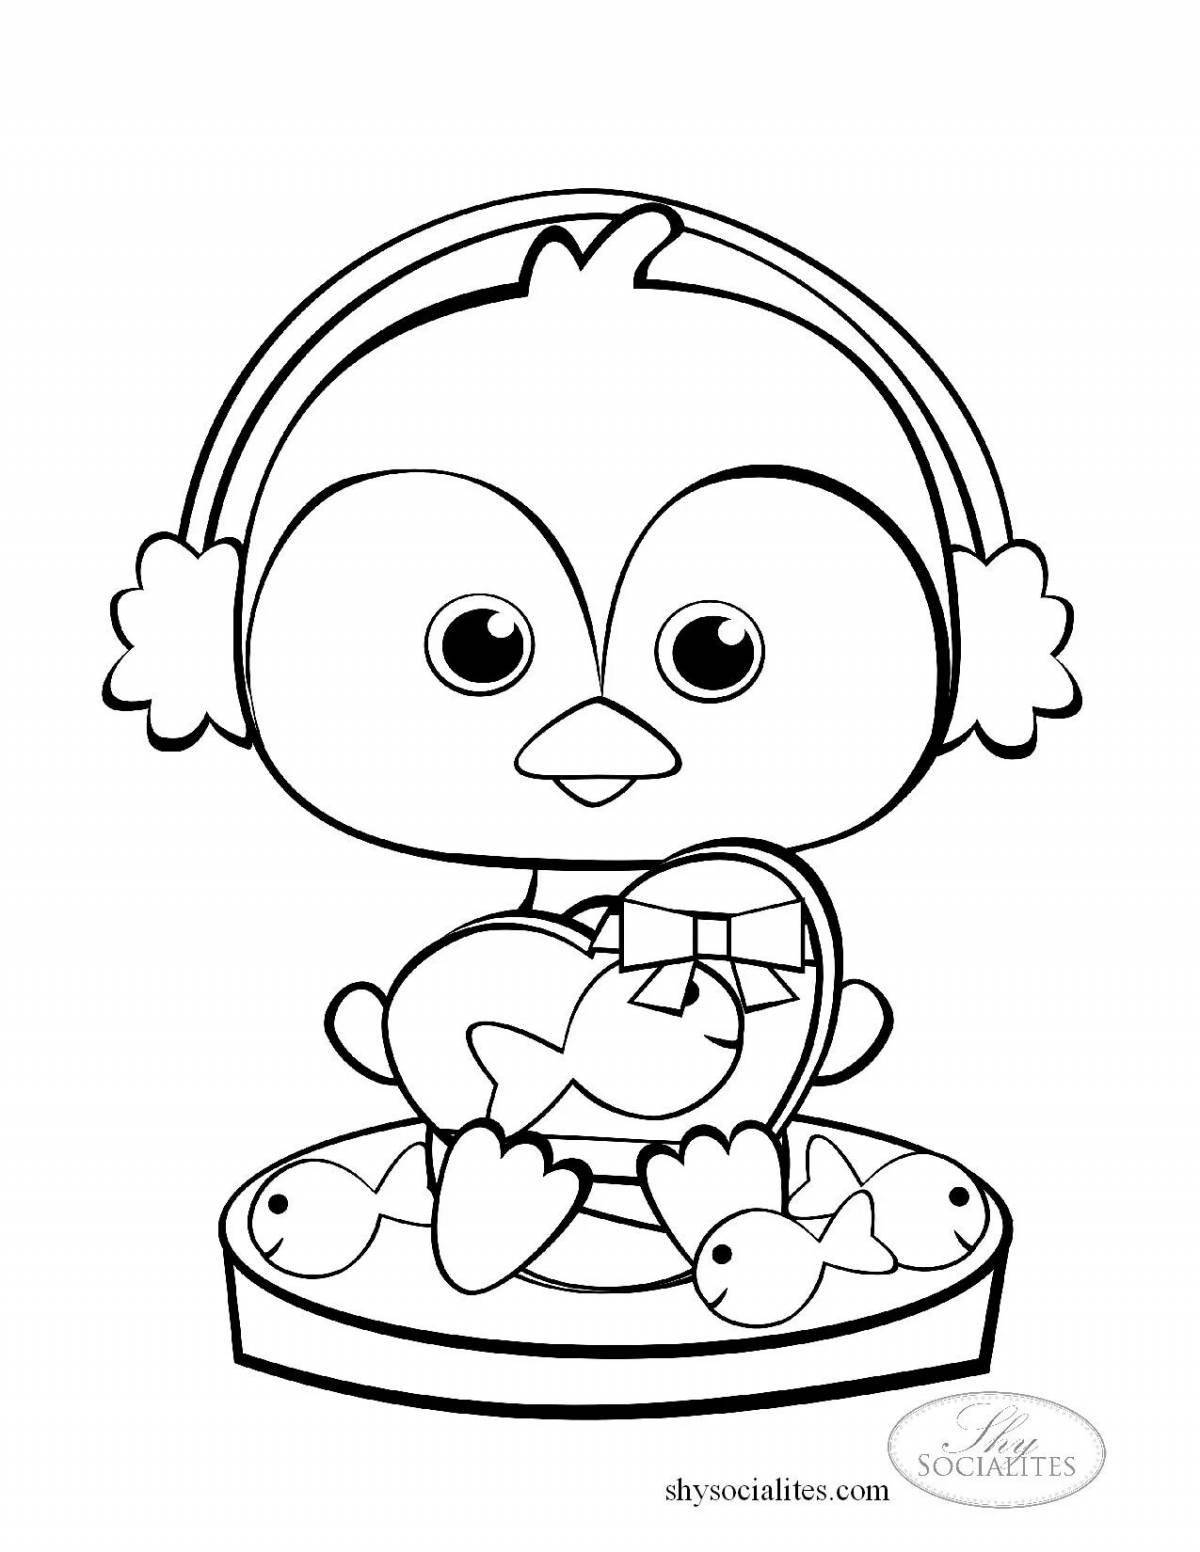 Adorable cute penguin coloring page